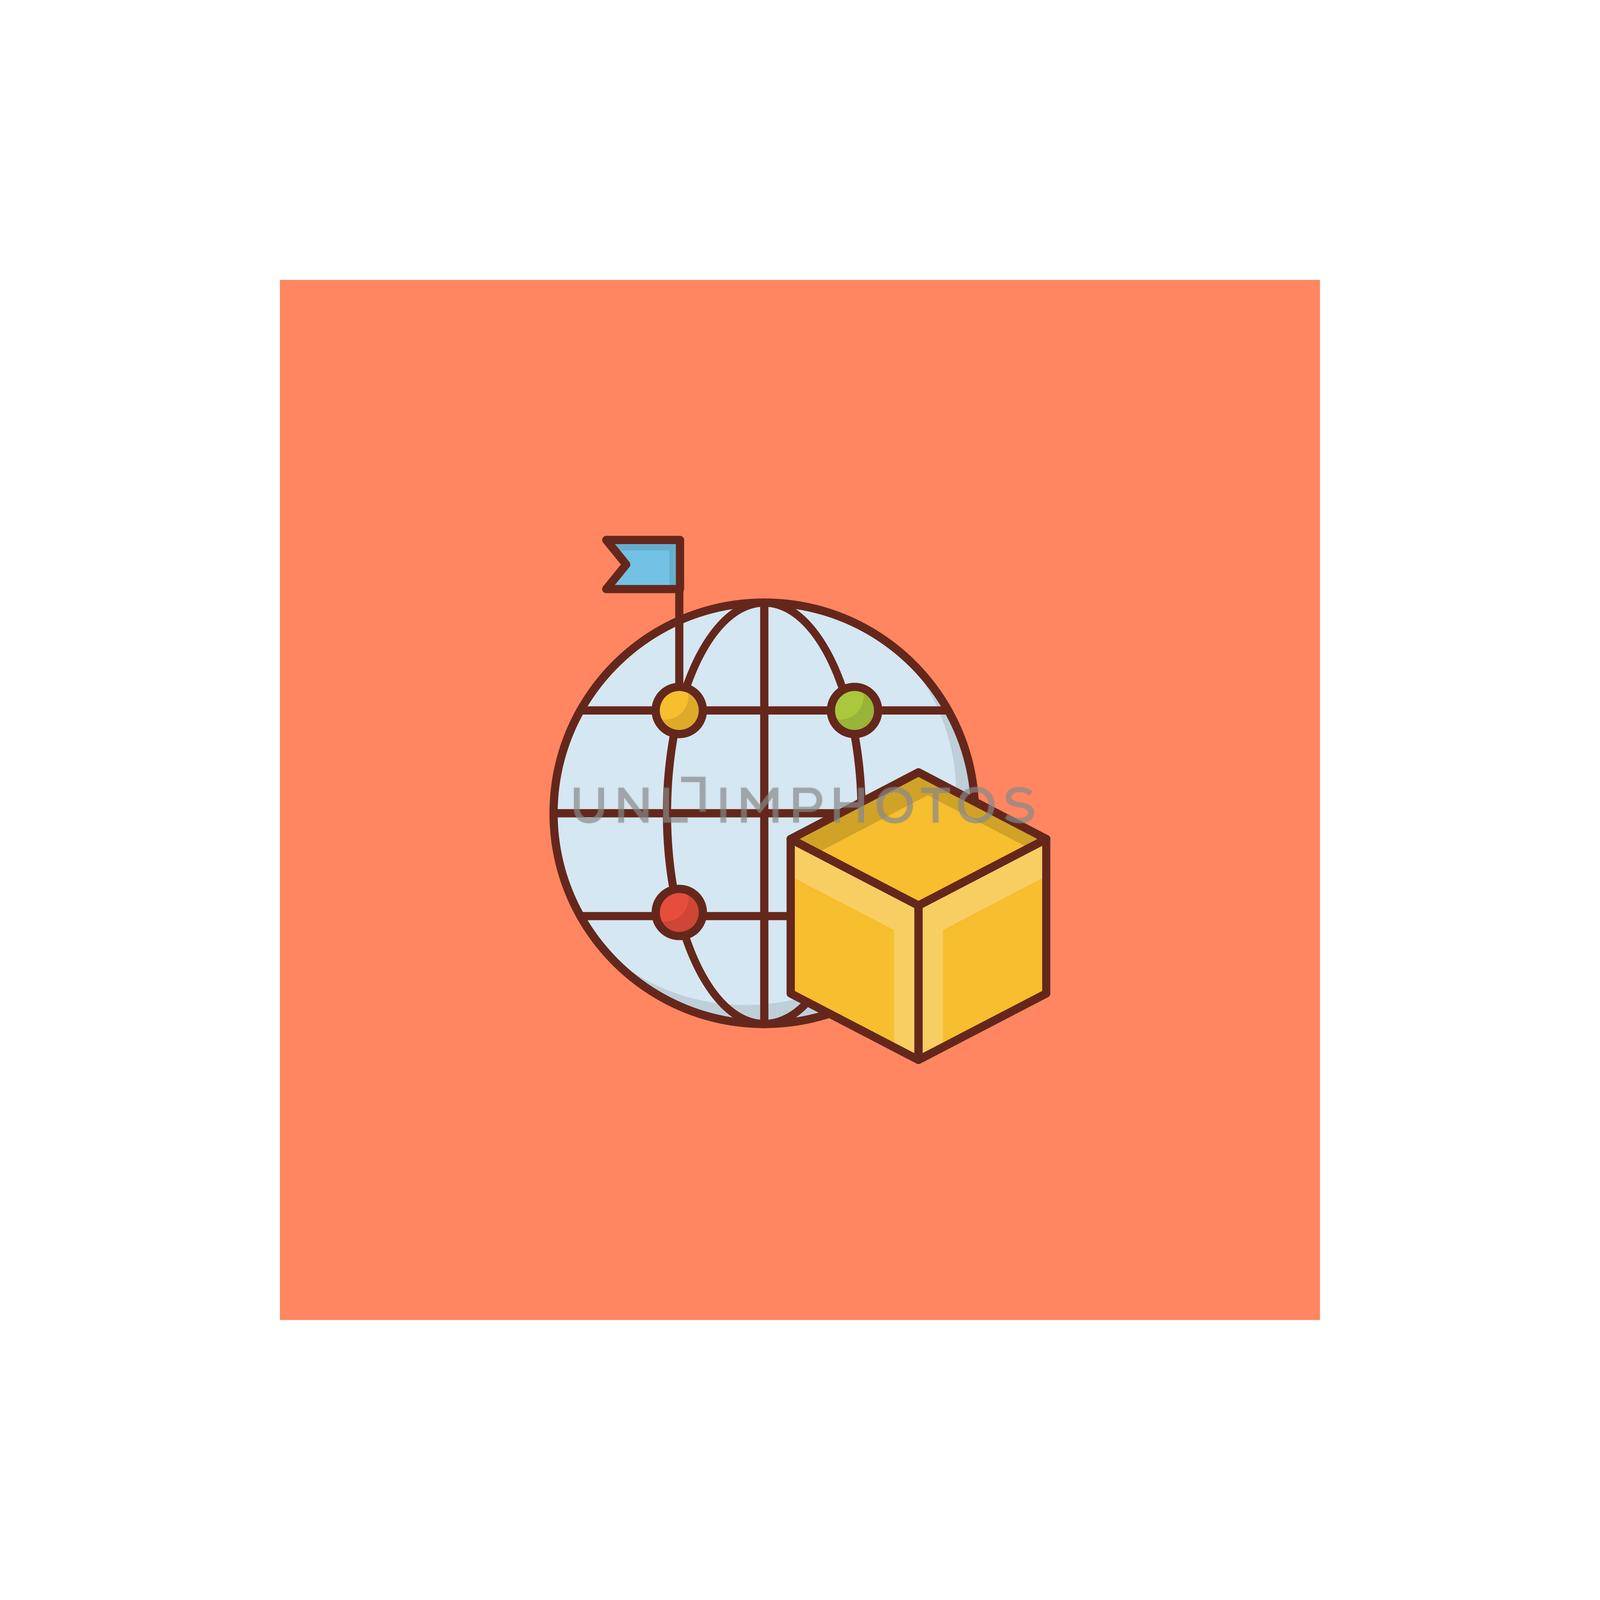 global by FlaticonsDesign